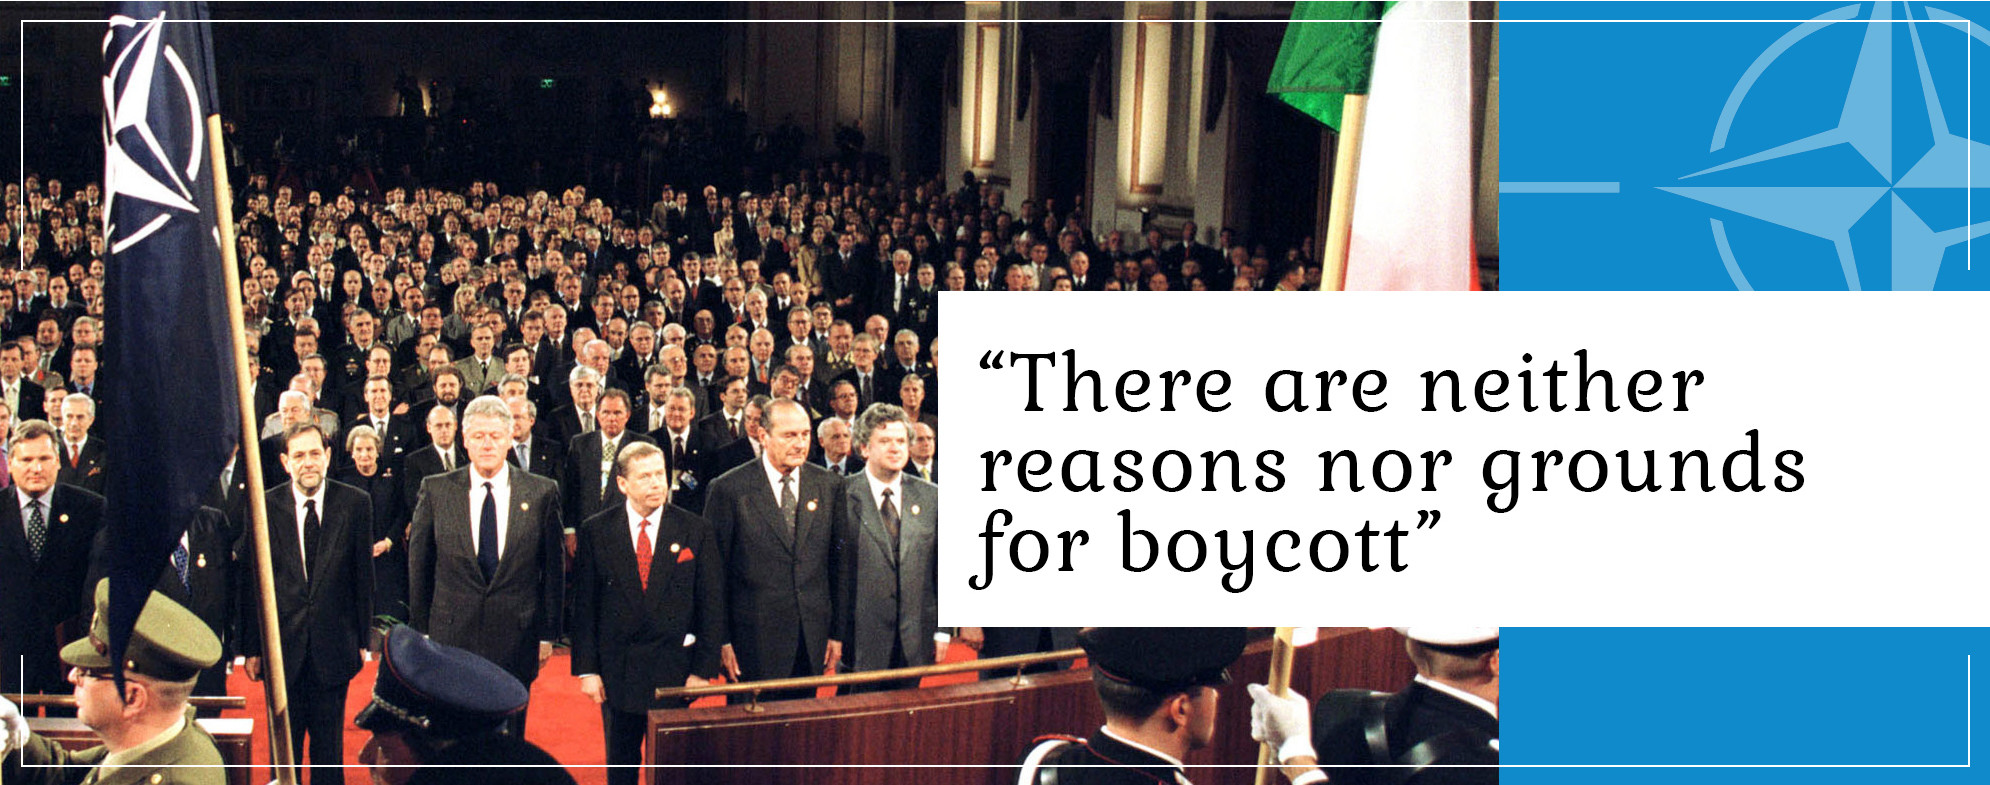 “There are neither reasons nor grounds for boycott”